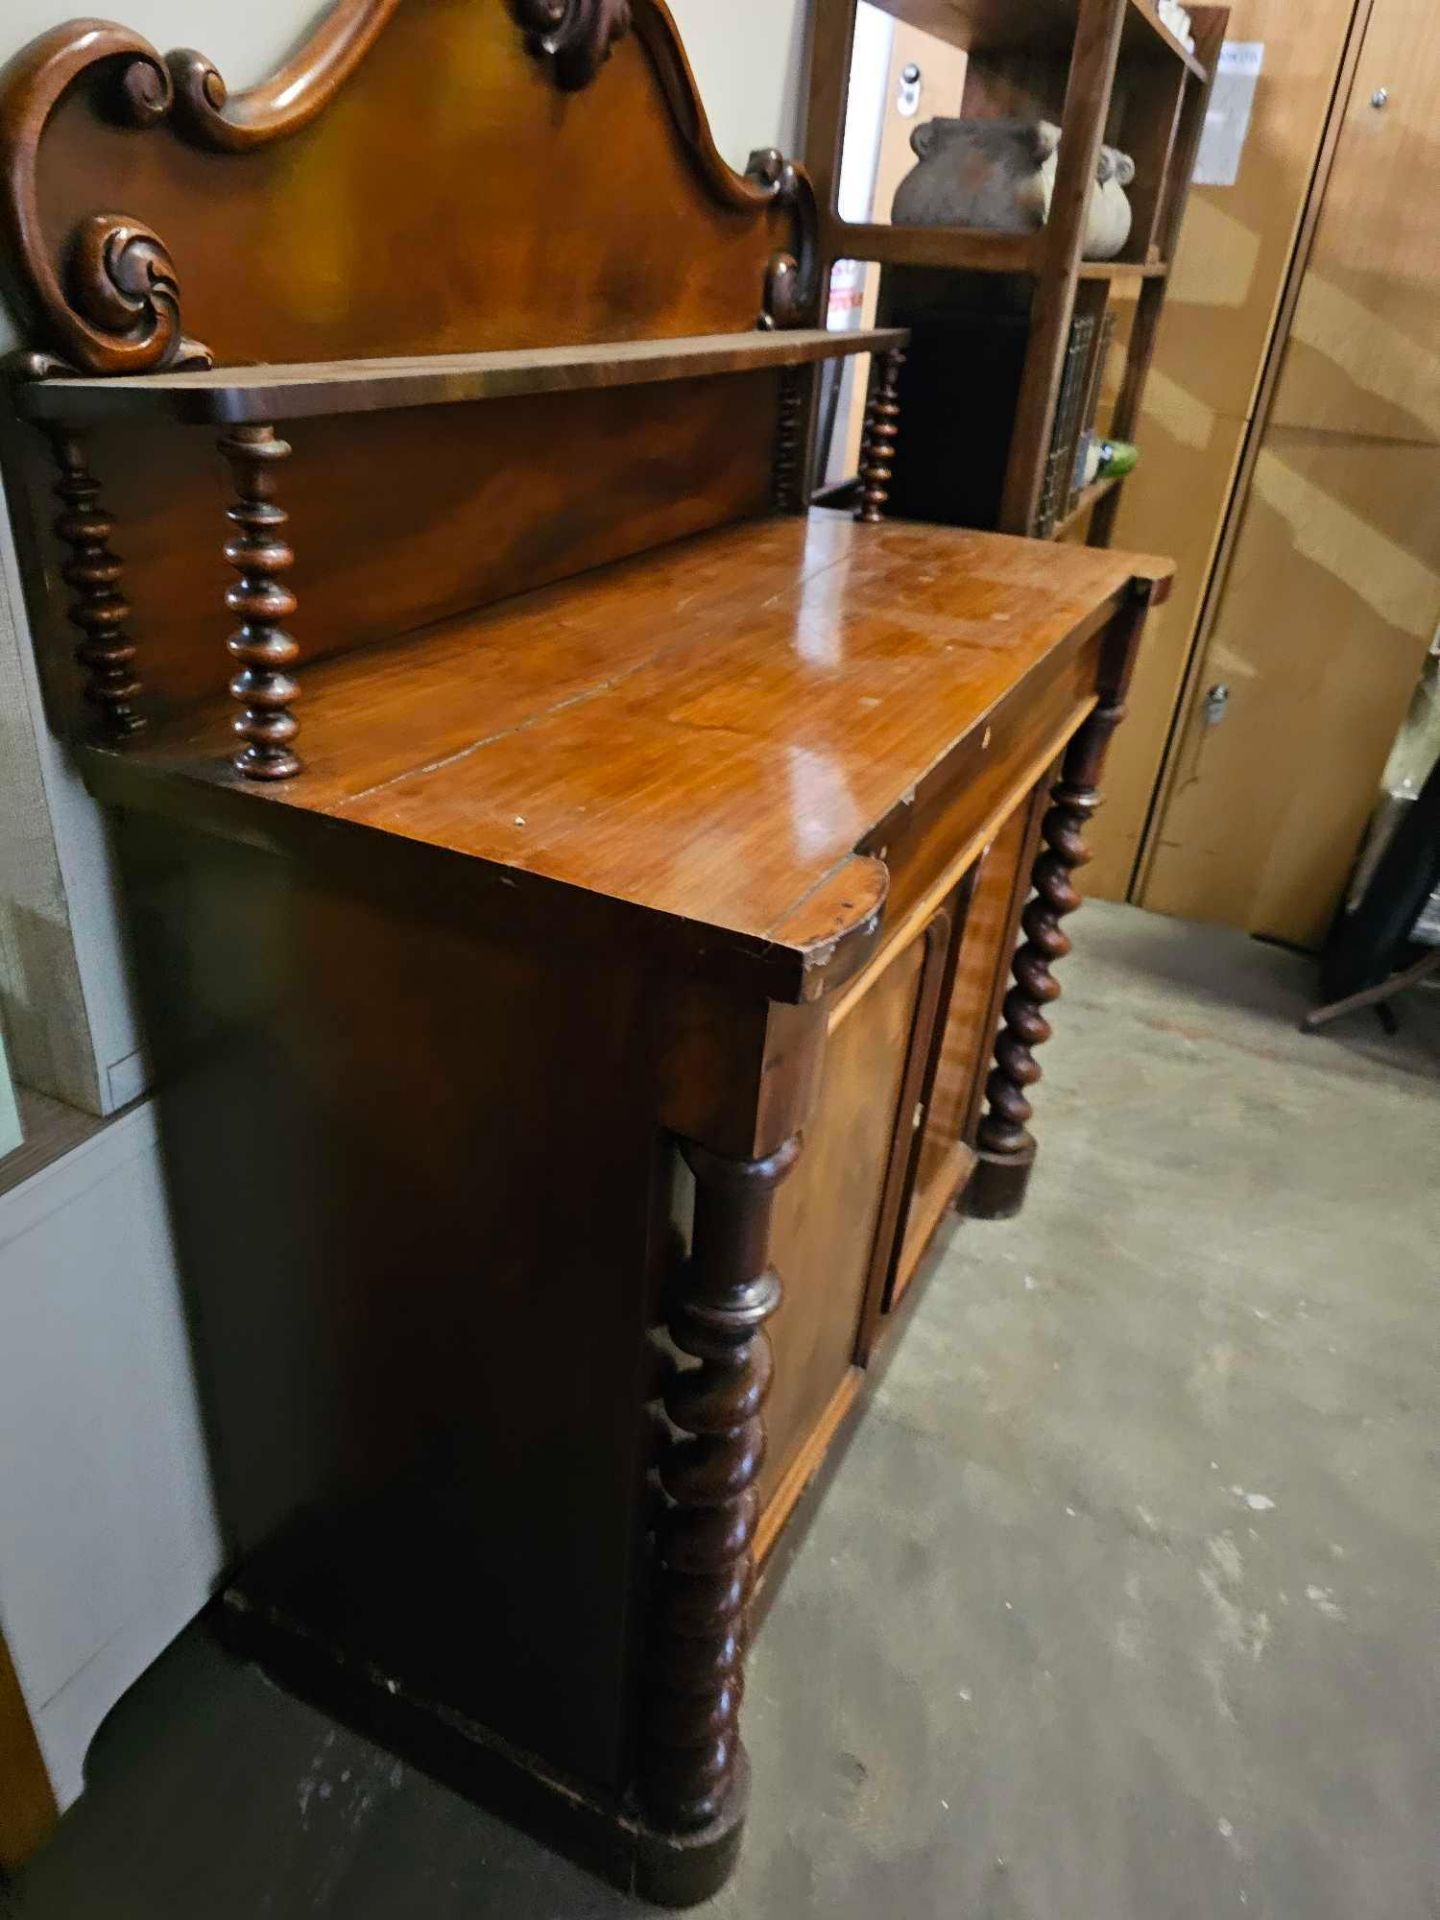 A Mahogany Victorian Style Chiffonier Two Door Cupboard With Drawers 120 x 55 x 150 (A/F) - Image 4 of 7